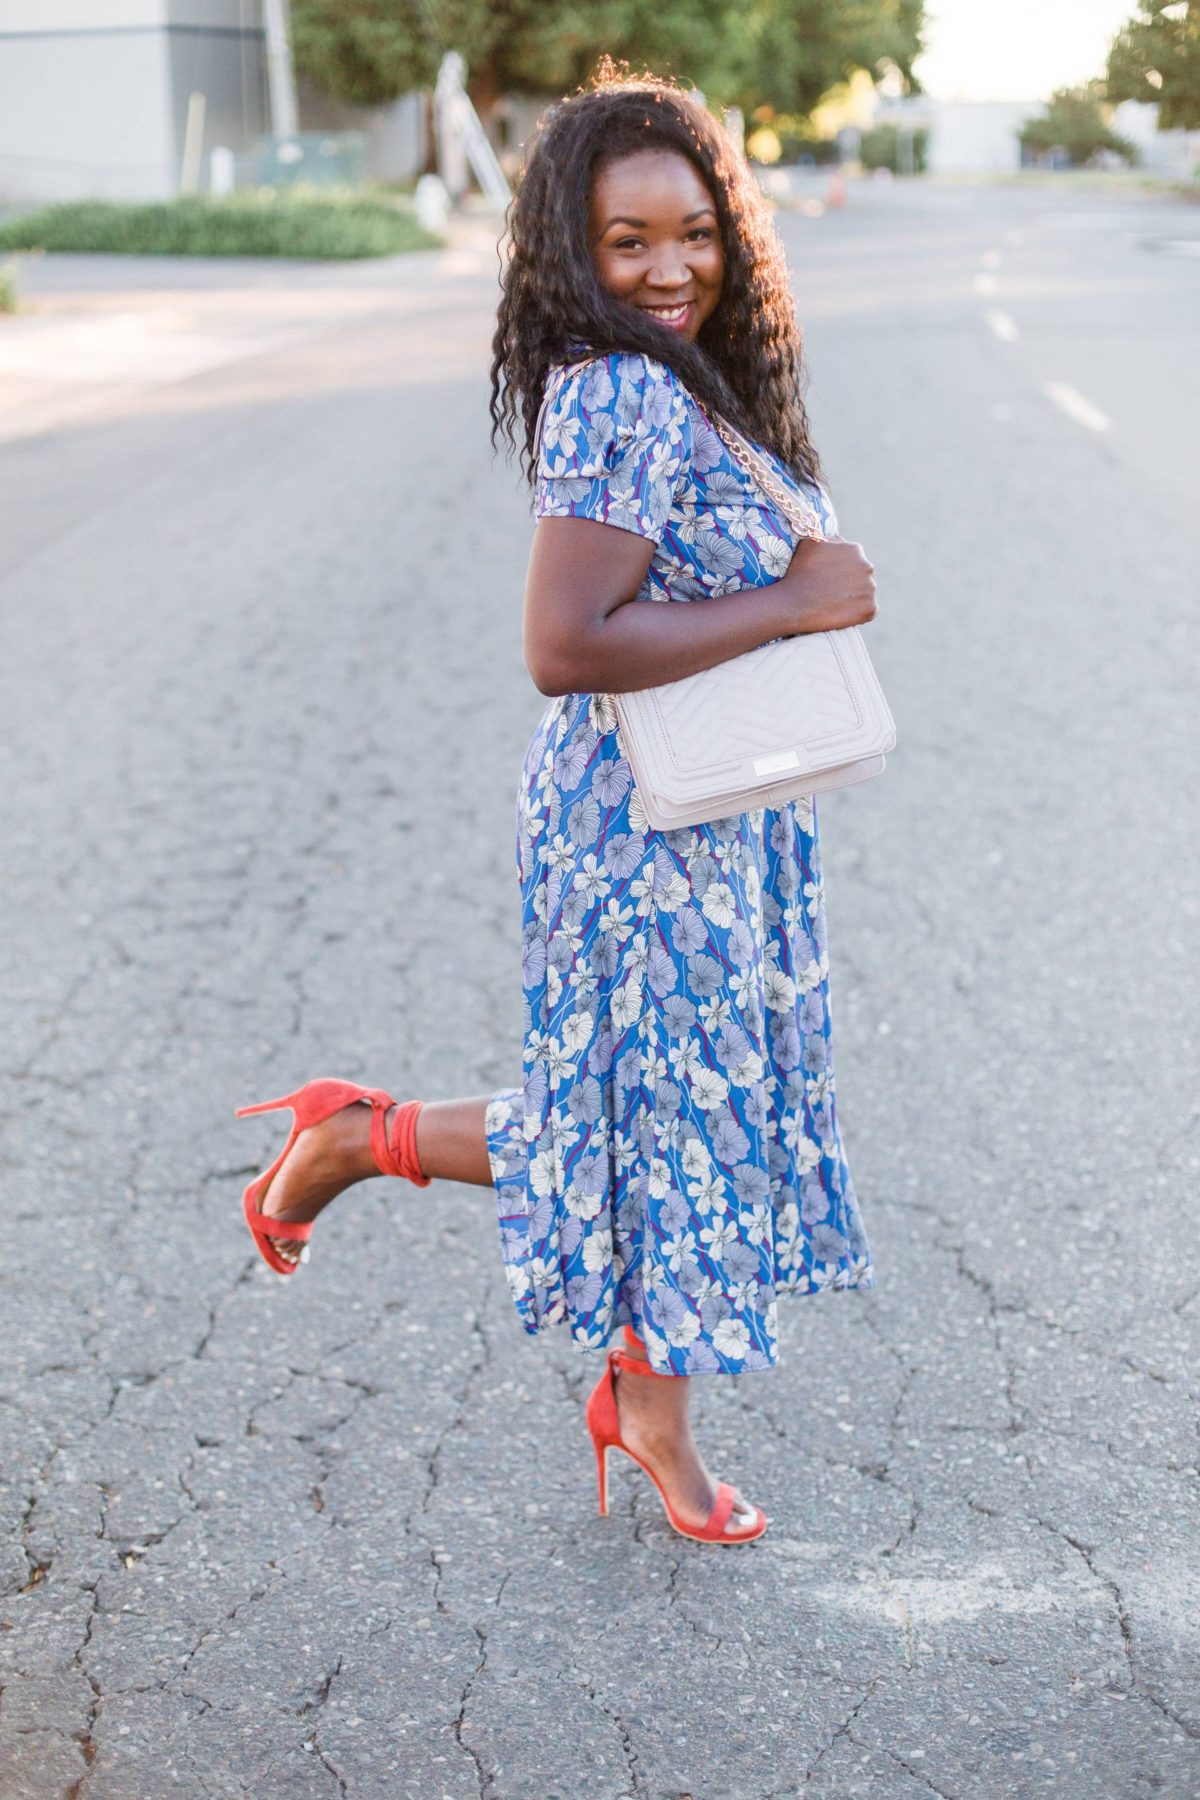 Floral Prints with Karina Dresses – Ruthie Ridley